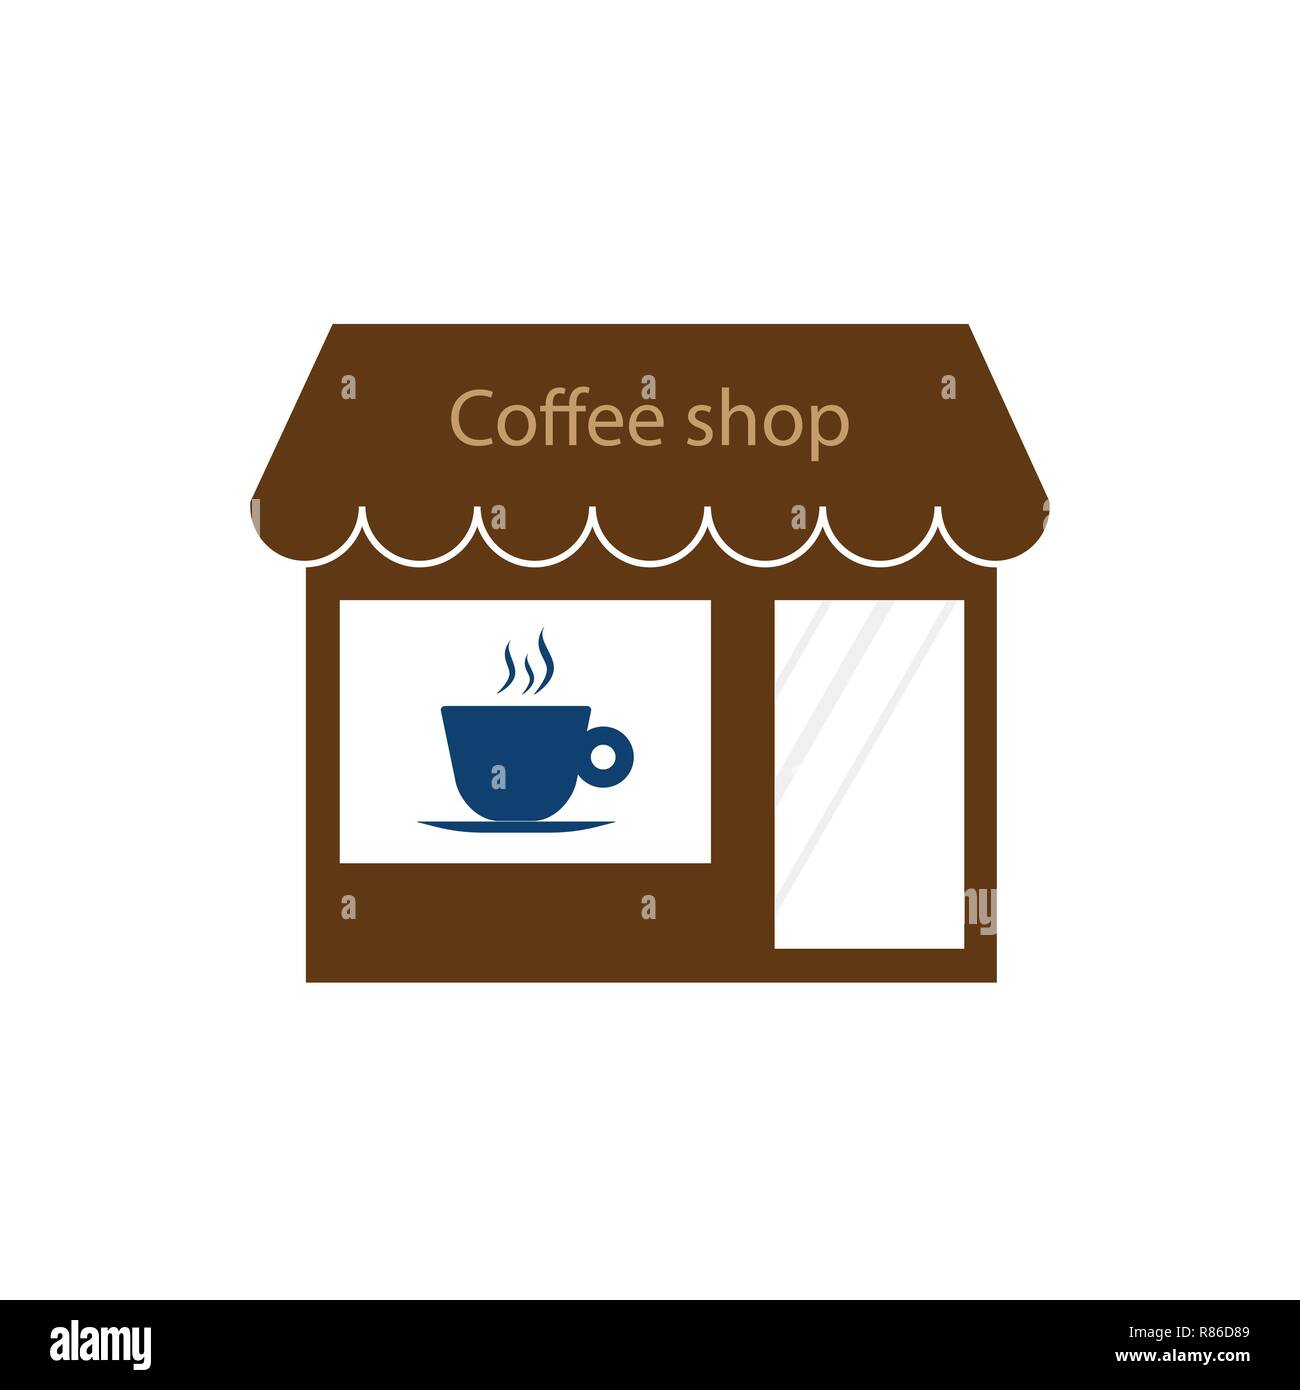 Commerce, coffee shop, store icon. Vector illustration. Stock Vector